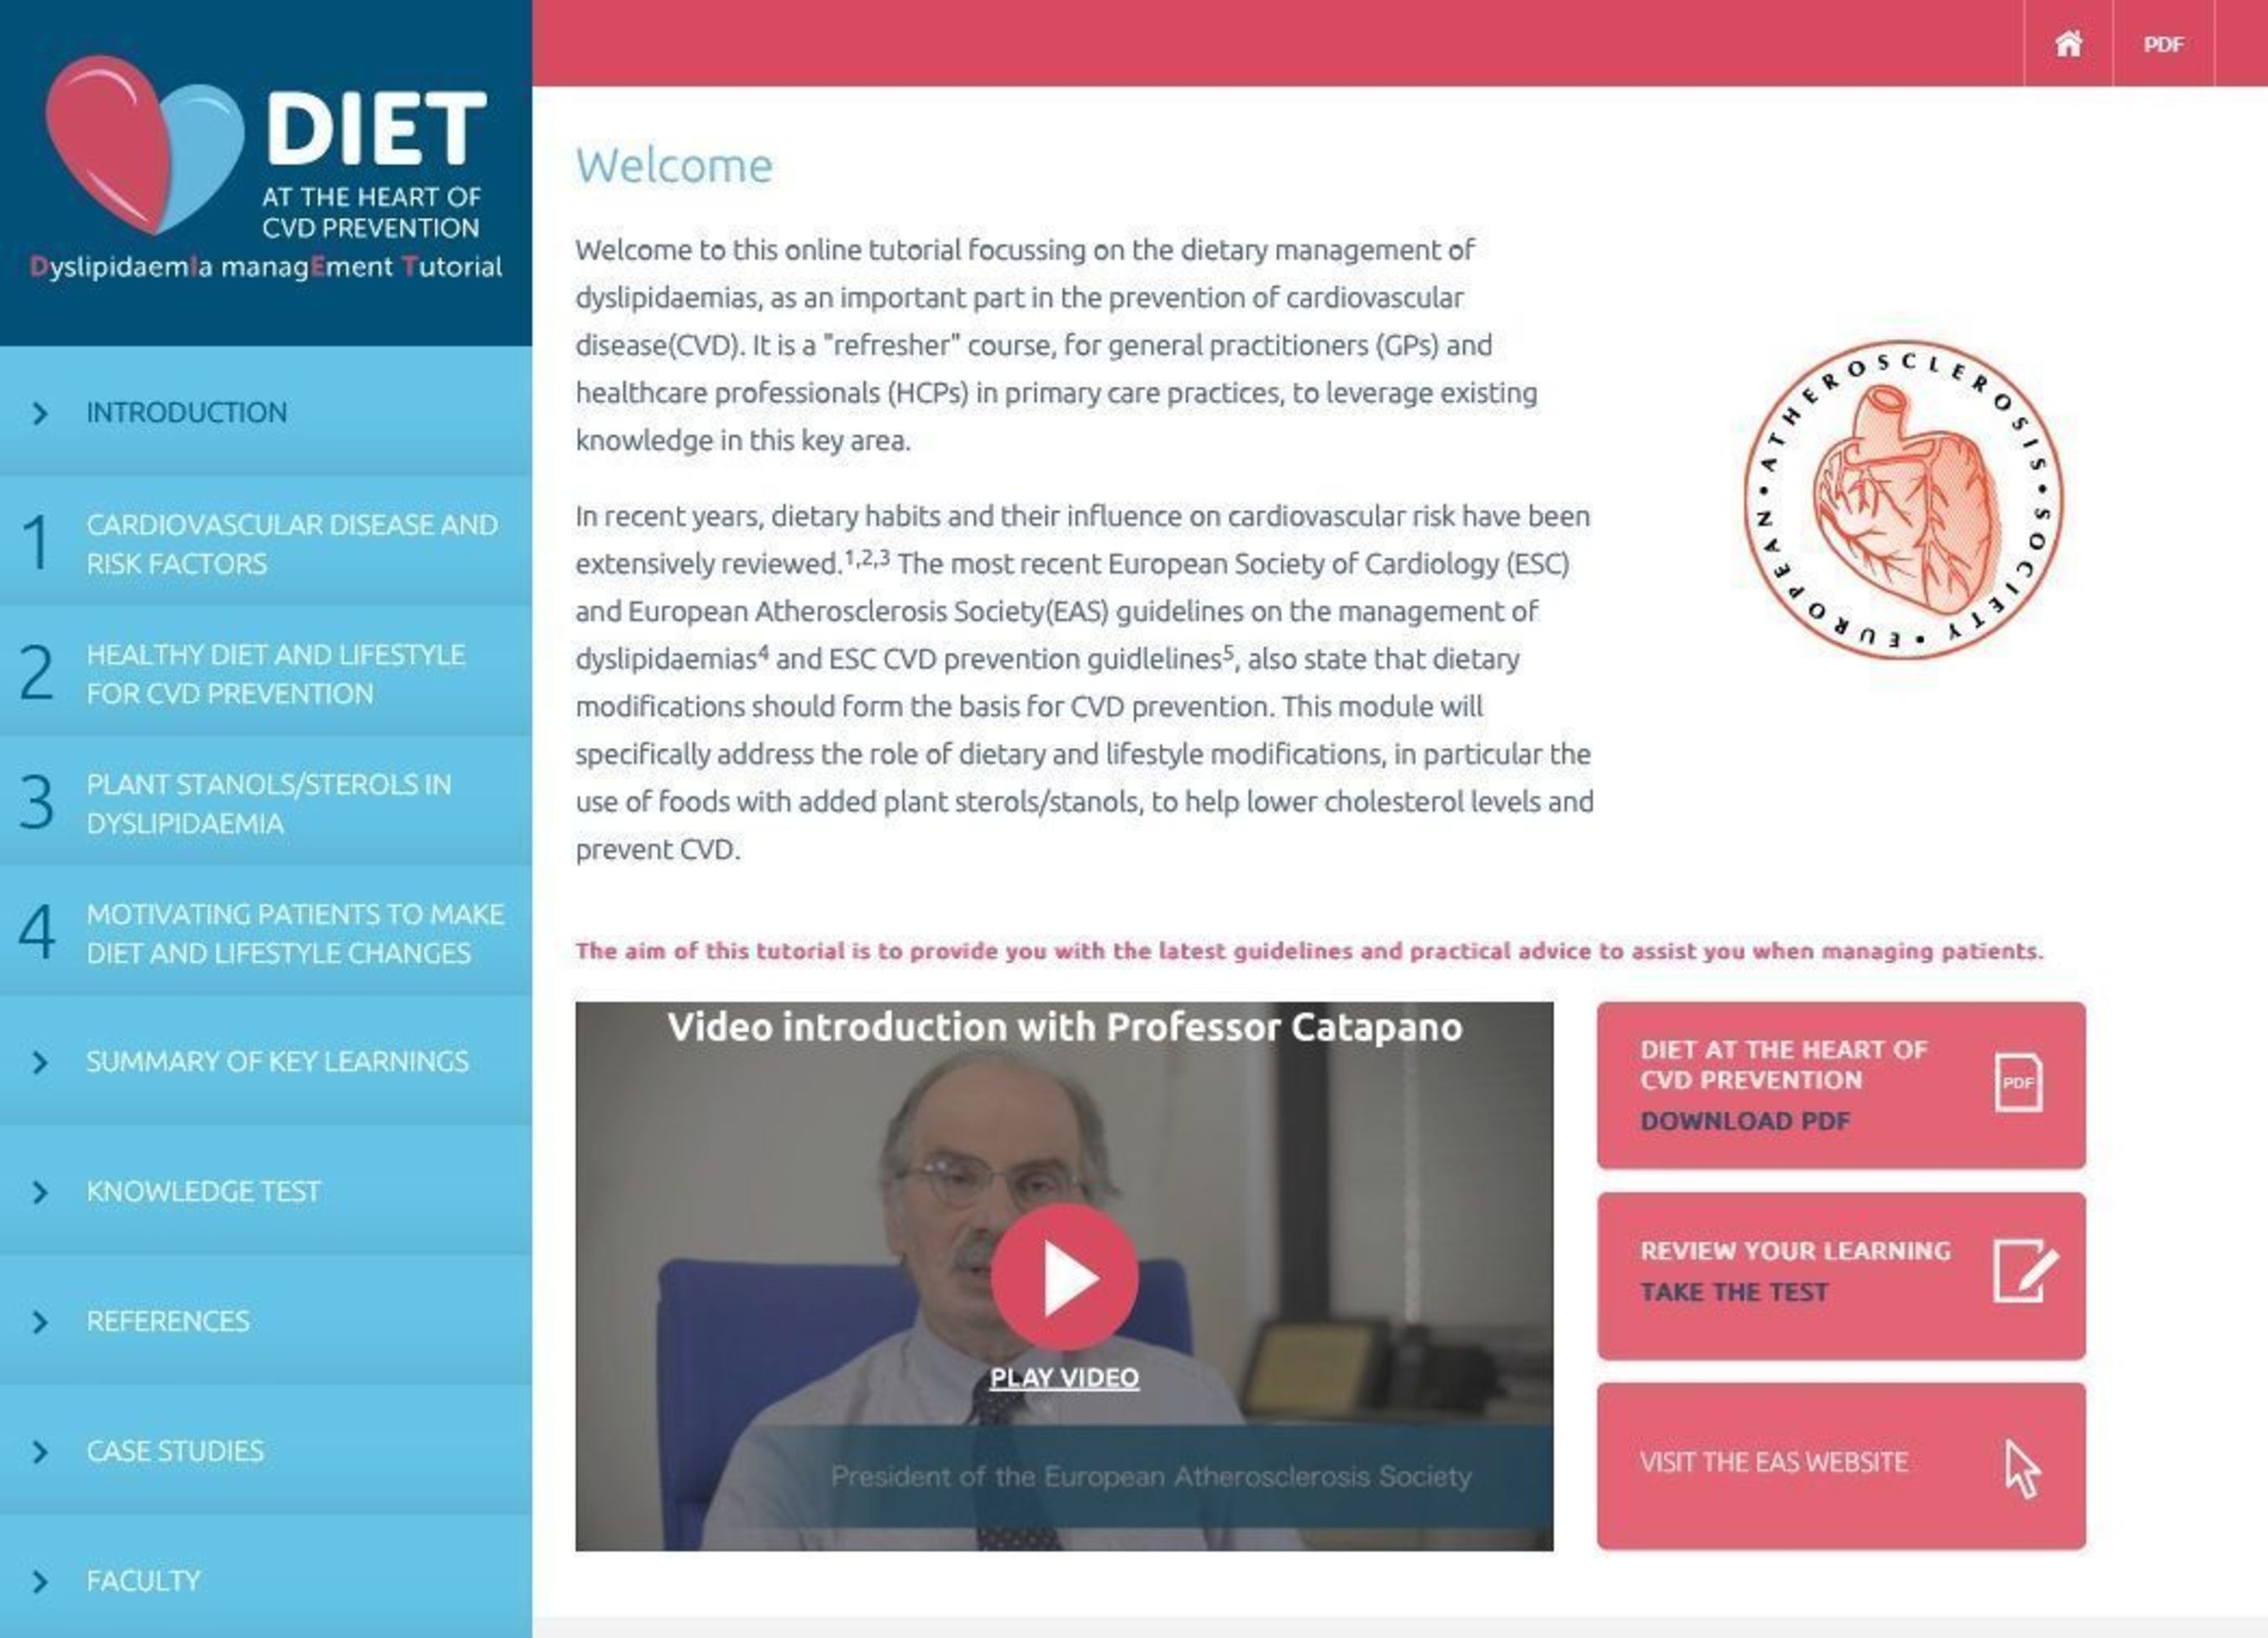 'New EAS-Endorsed Training Resource: DyslipidaemIa ManagEment Tutorial - DIET at the Heart of CVD Prevention' (PRNewsFoto/DIET at Heart of CVD Prevention)